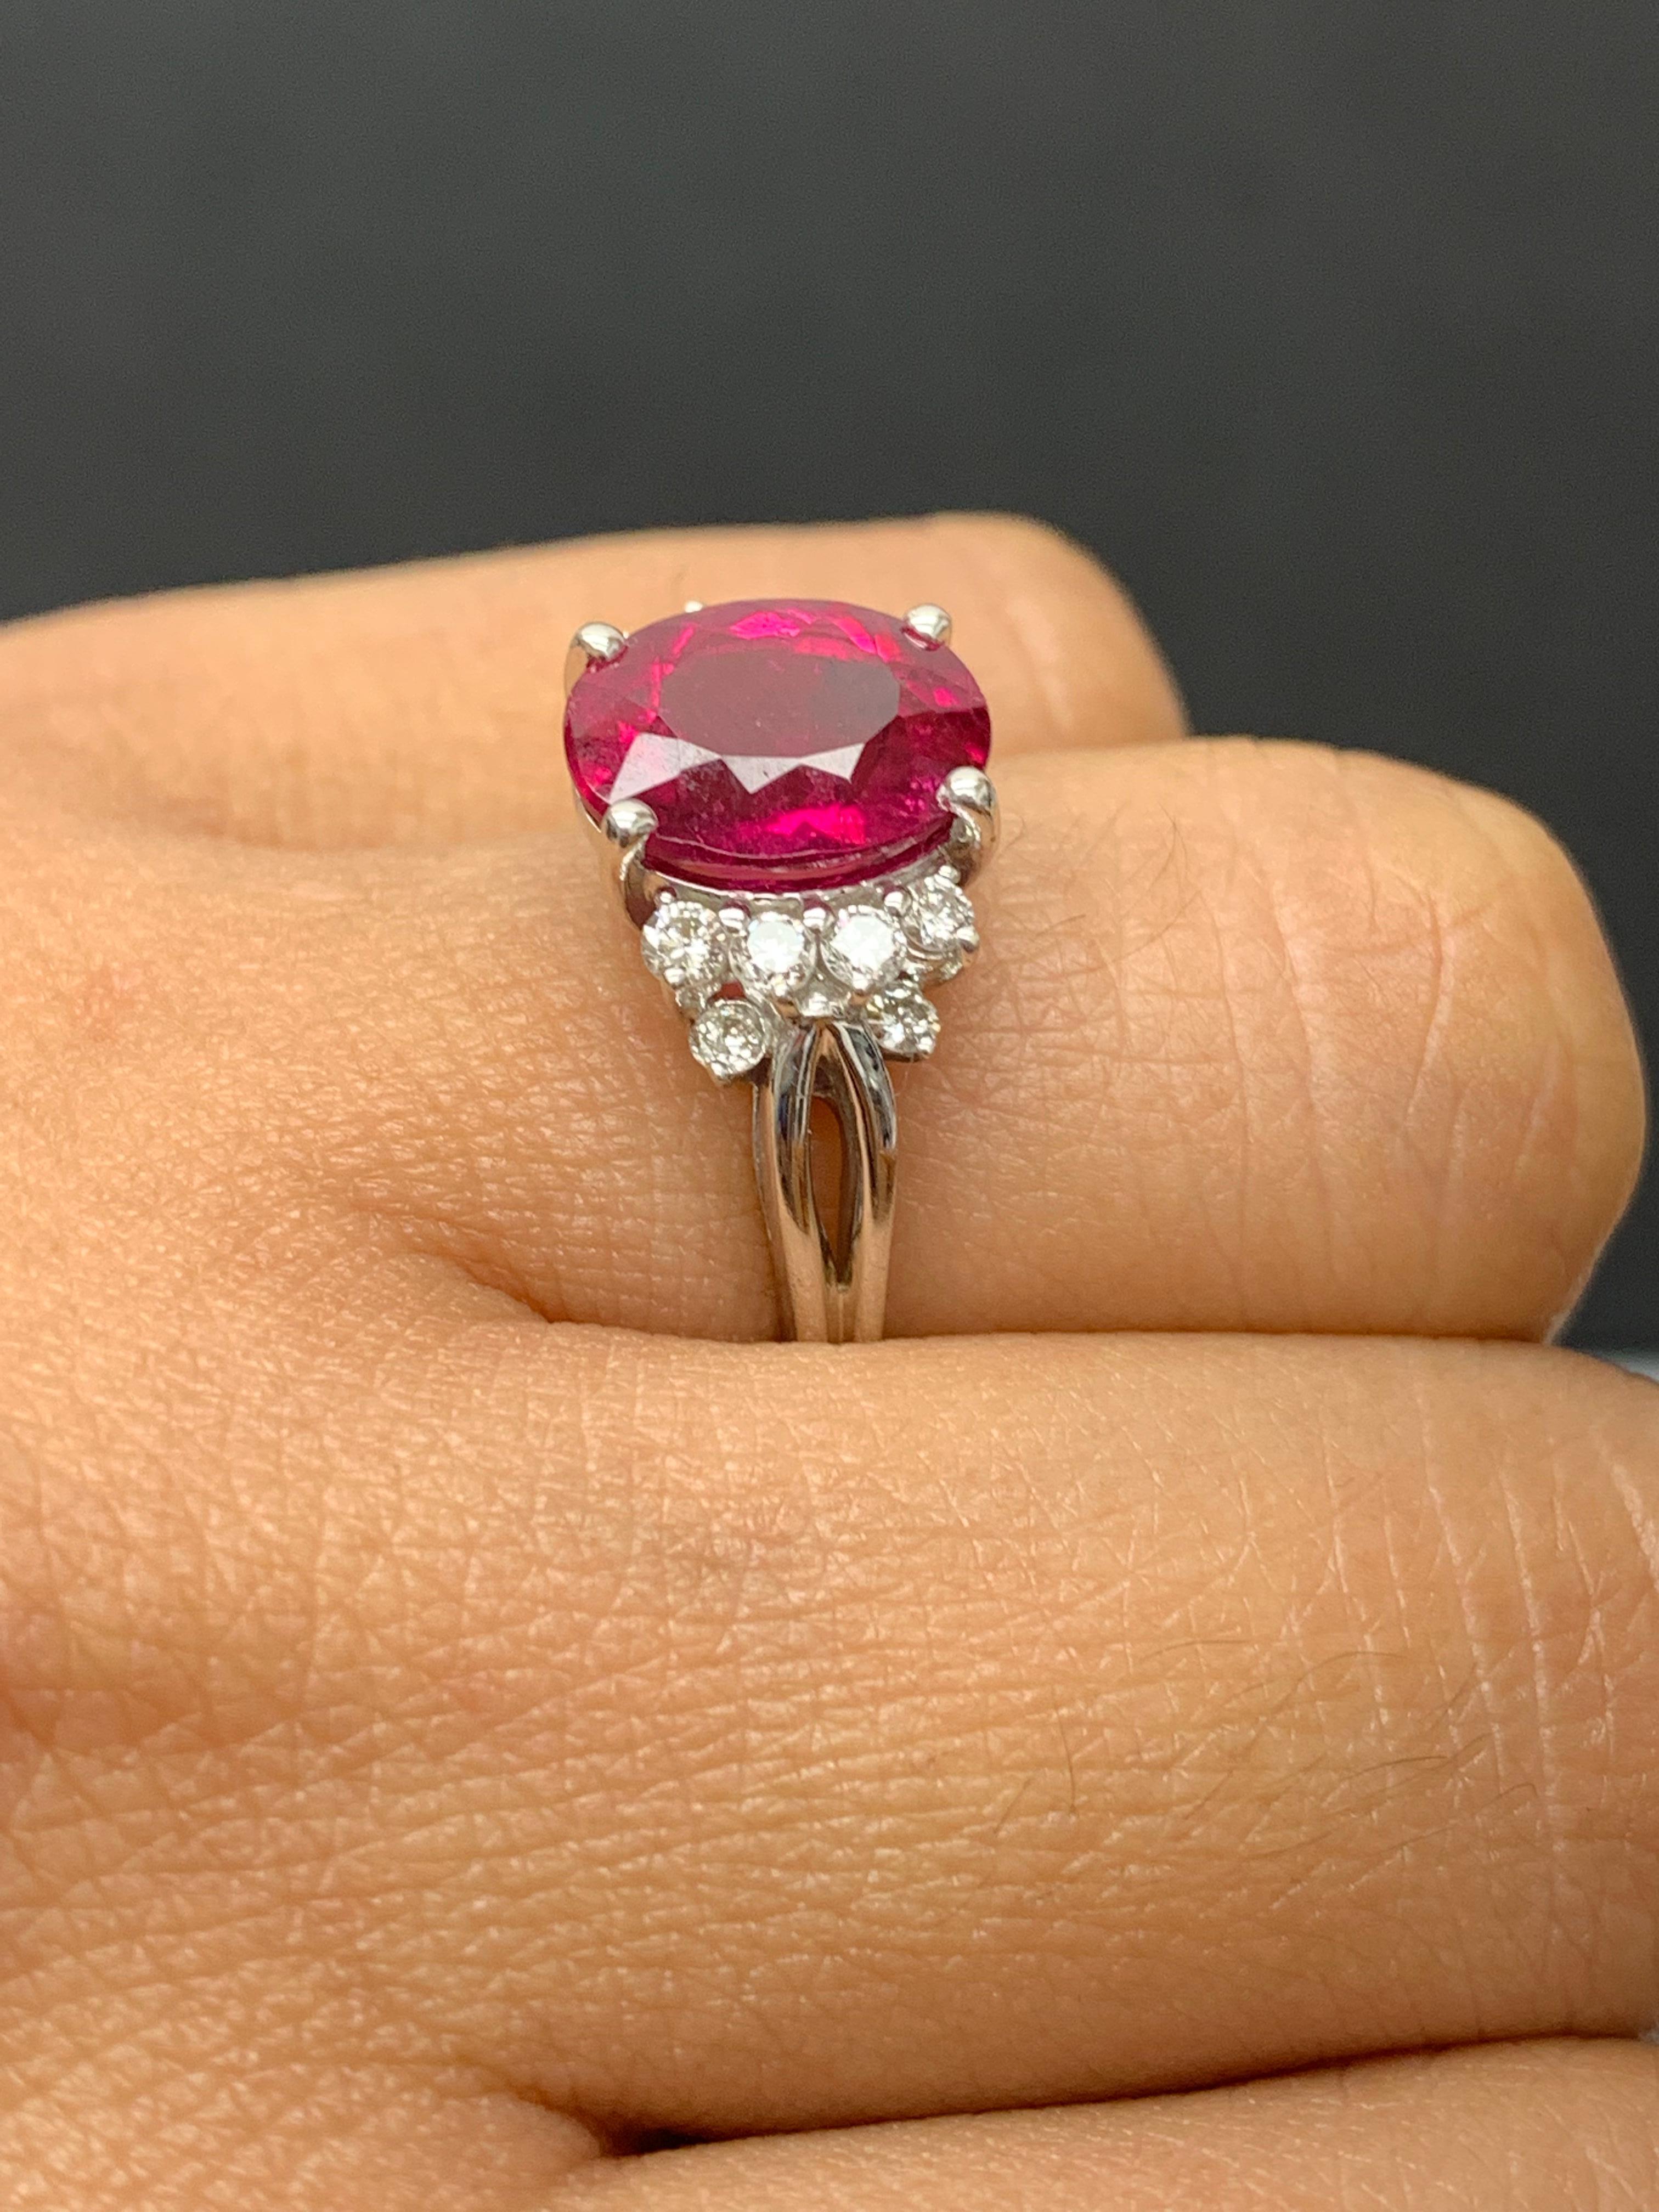 2.80 Carat Oval Cut Pink Tourmaline and Diamond Ring in 18K White Gold For Sale 3